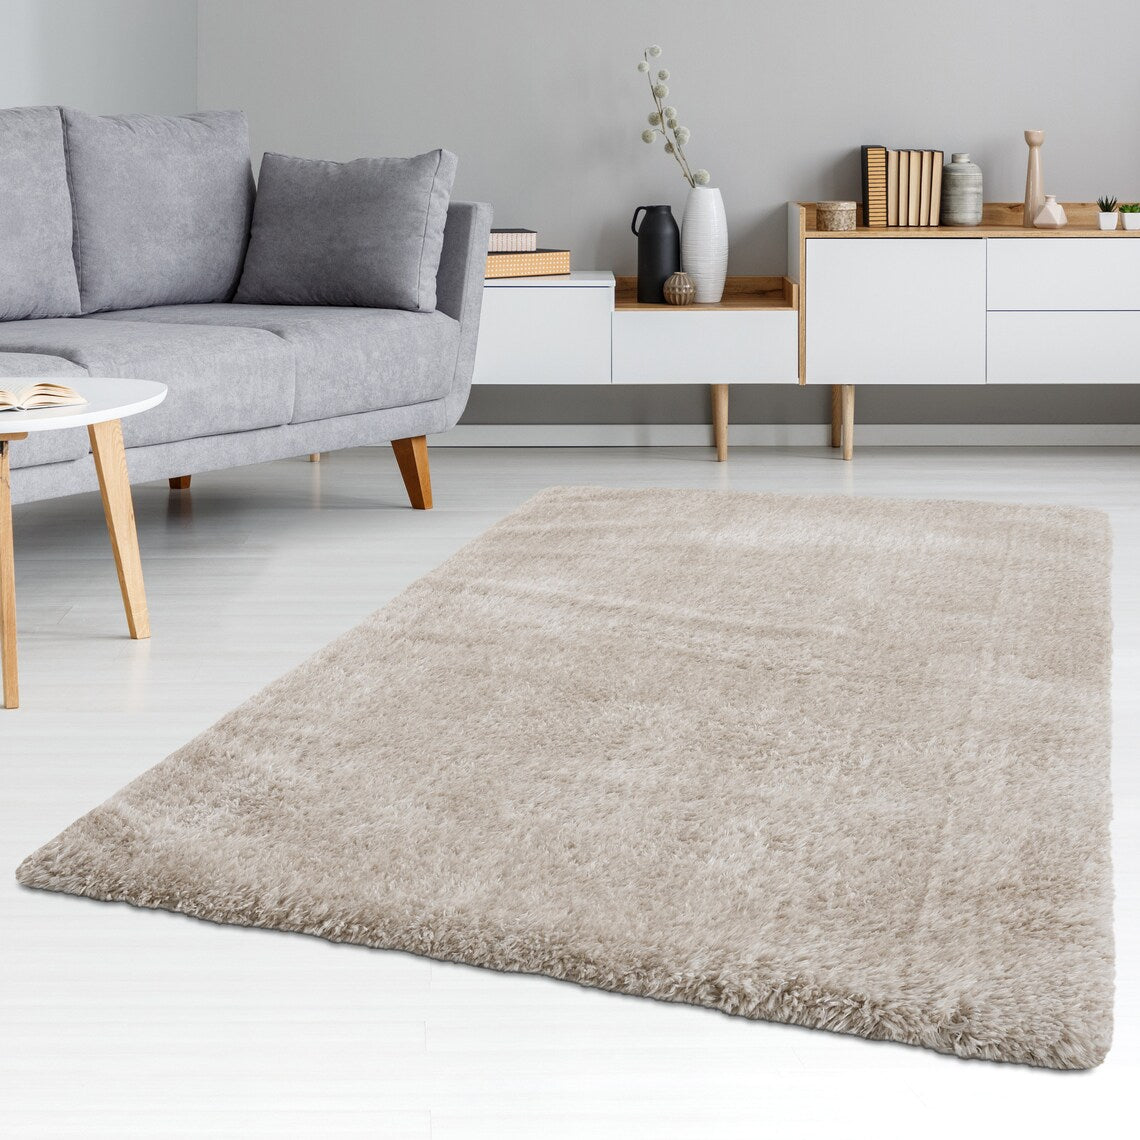 Stylish High Quality Coloured Shaped&Patterned Living Room Saloon Feather Rugs-Carpets